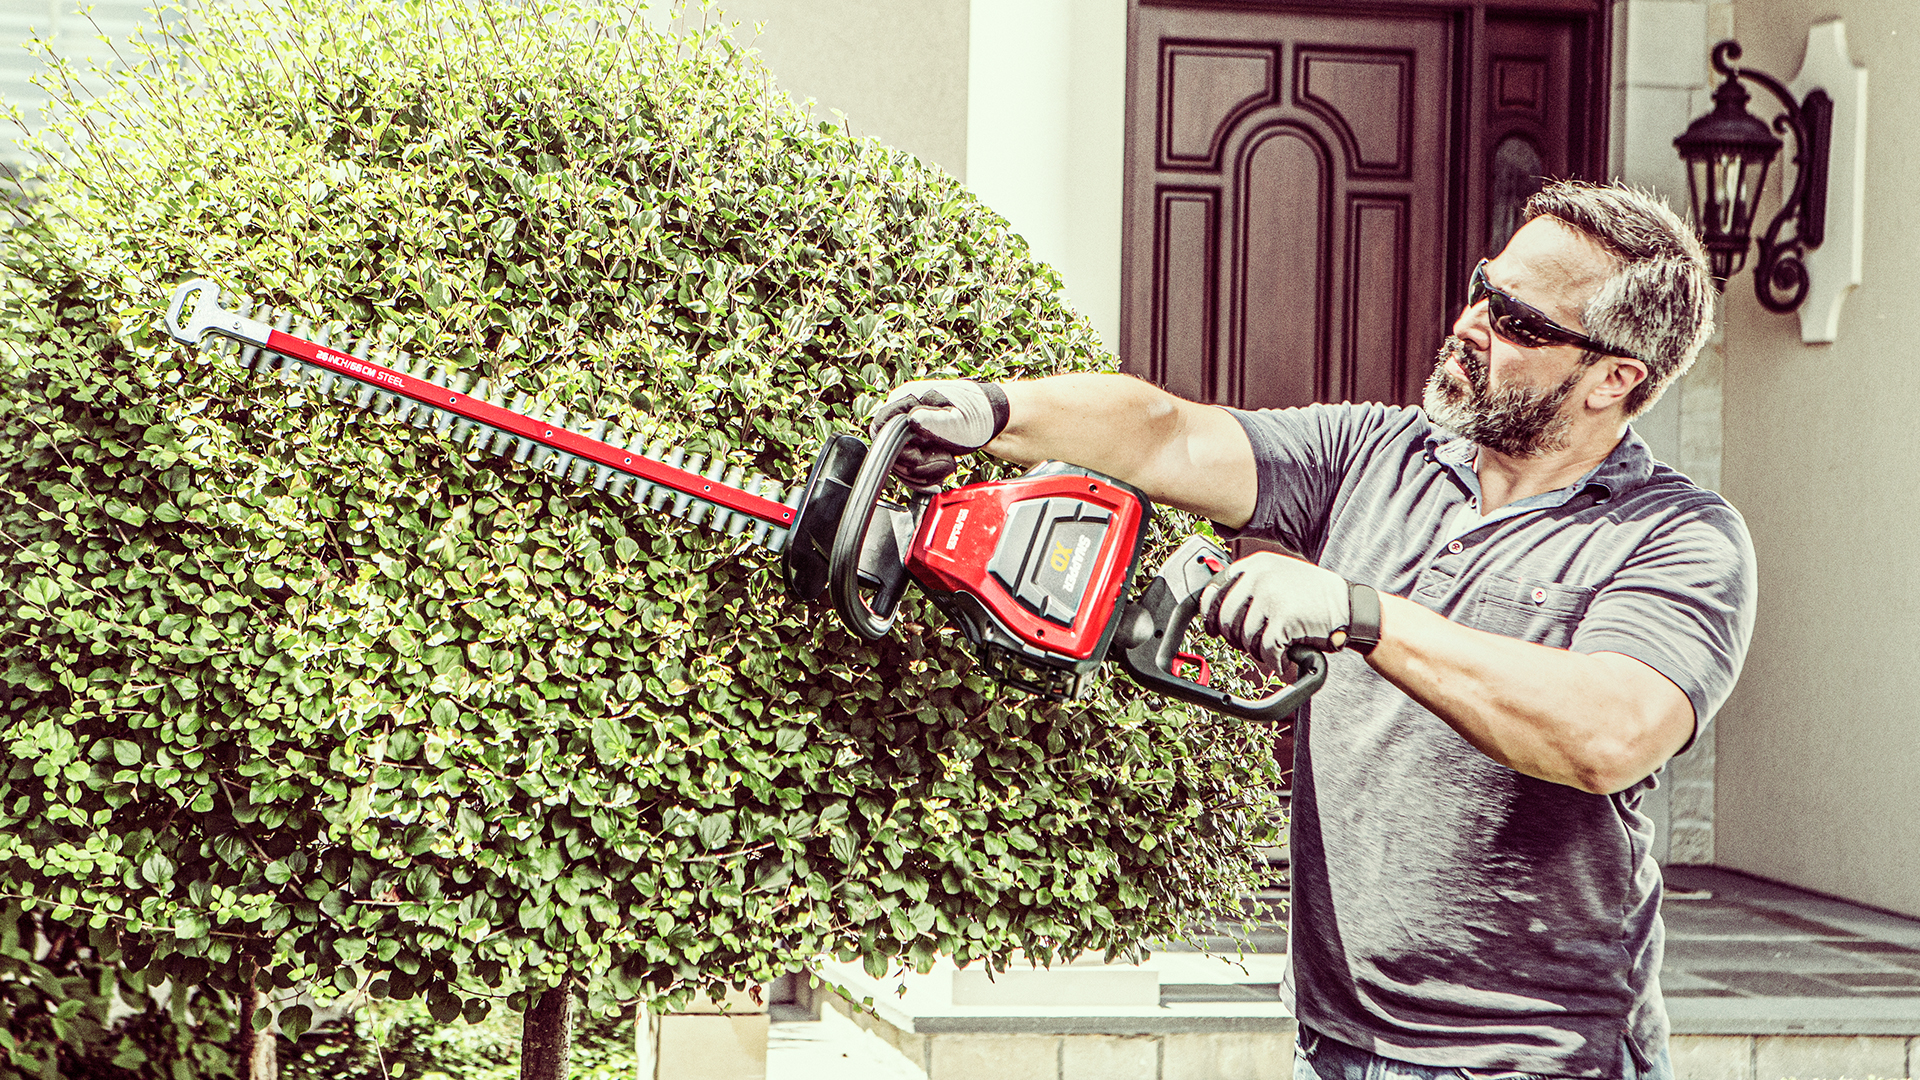 https://www.snapper.com/content/dam/Product%20Catalog/Snapper/en/electric-products/hedge-trimmers/feature-benefits/SNP_82VHedgeTrimmer_FB_BrushlessMotor.jpg